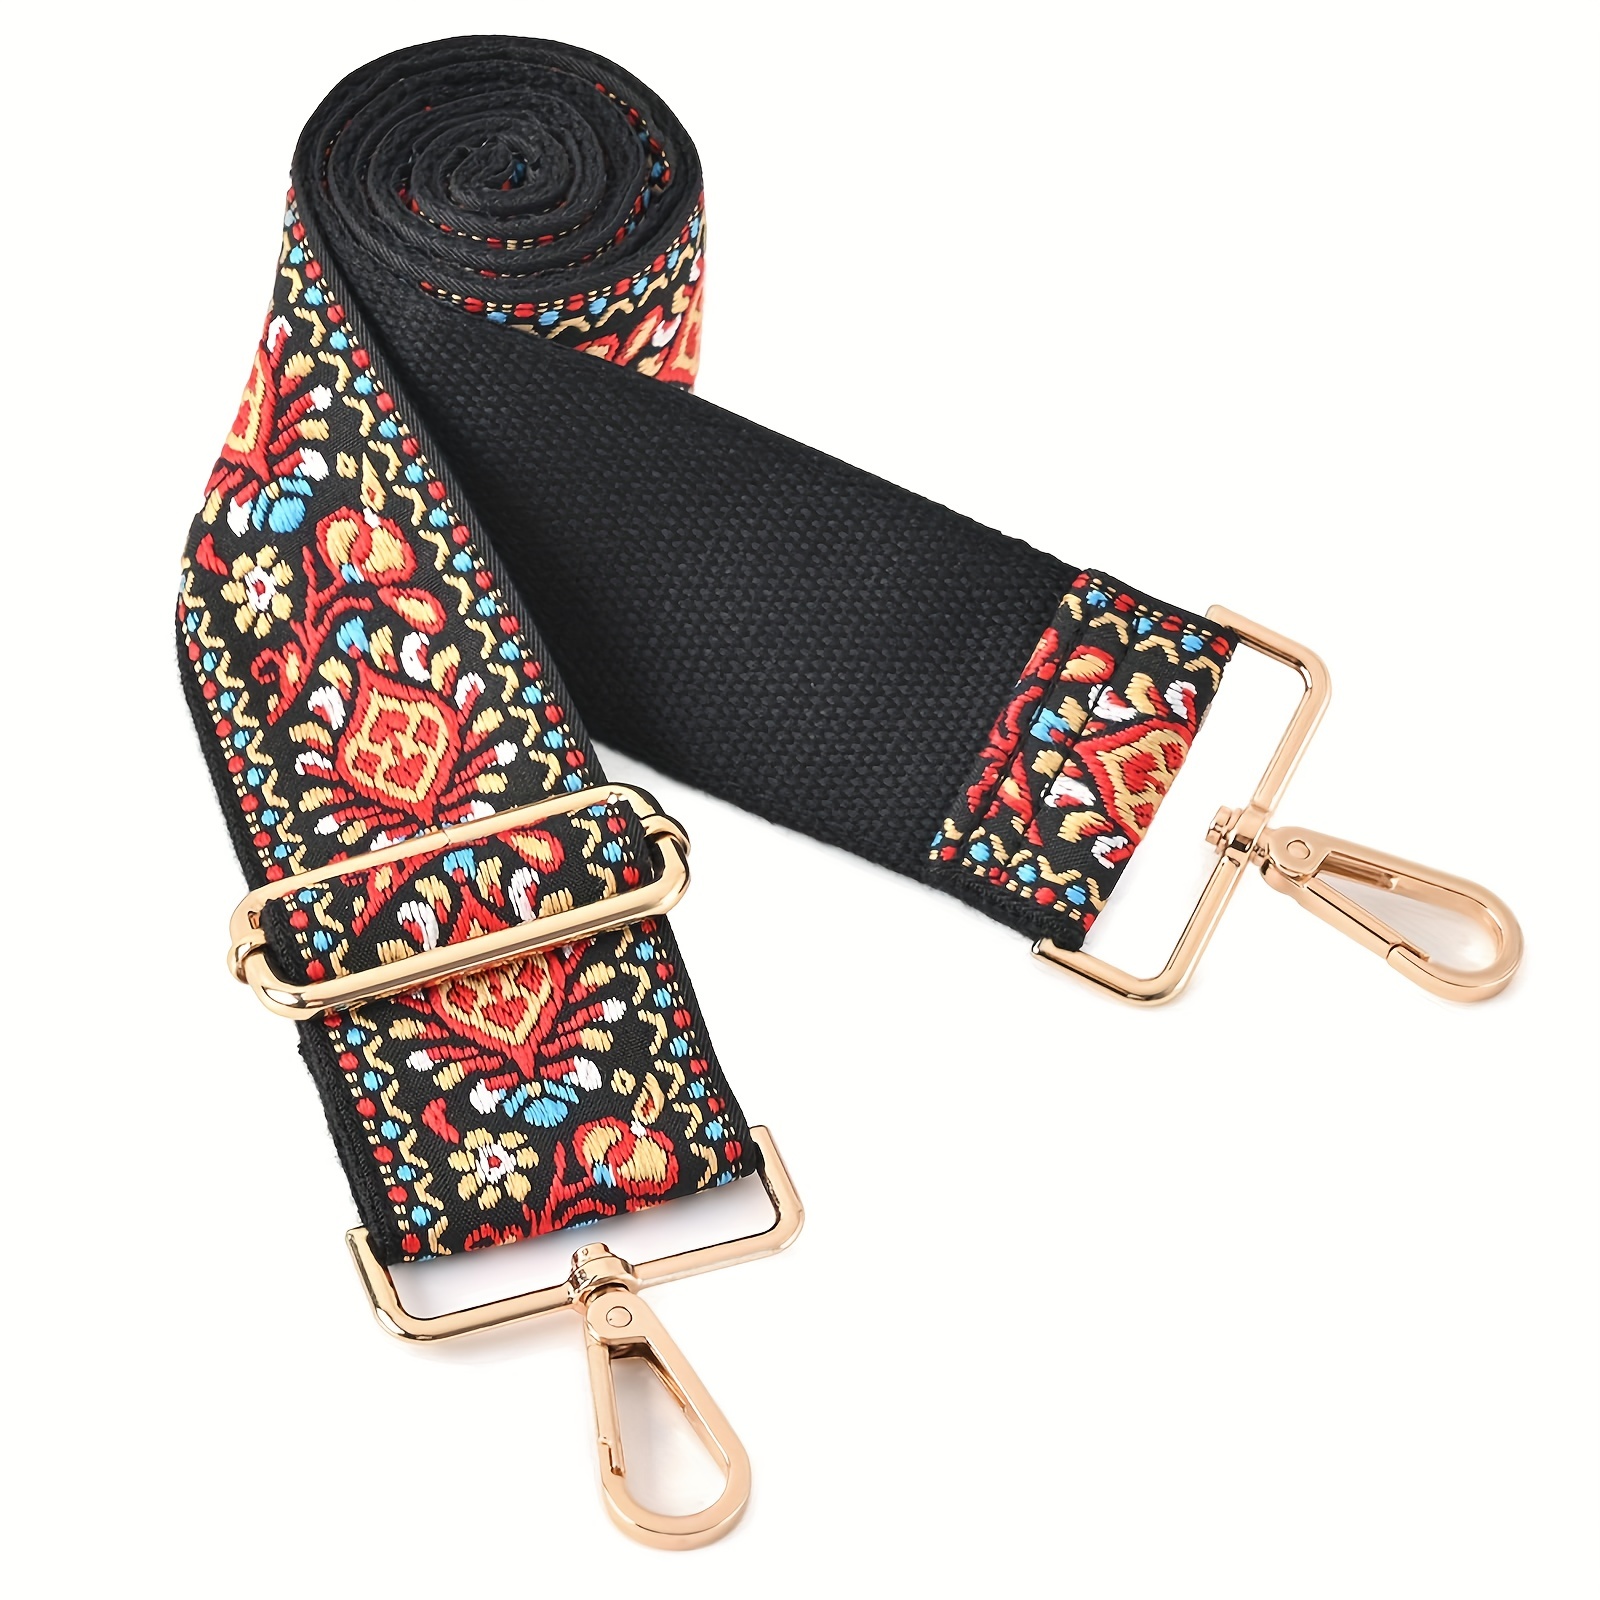 

Ethnic Embroidered Wrap Strap Adjustable, Simple Adjustable Wrap Strap, Portable Strap, Multifunctional Strap For Men And Women